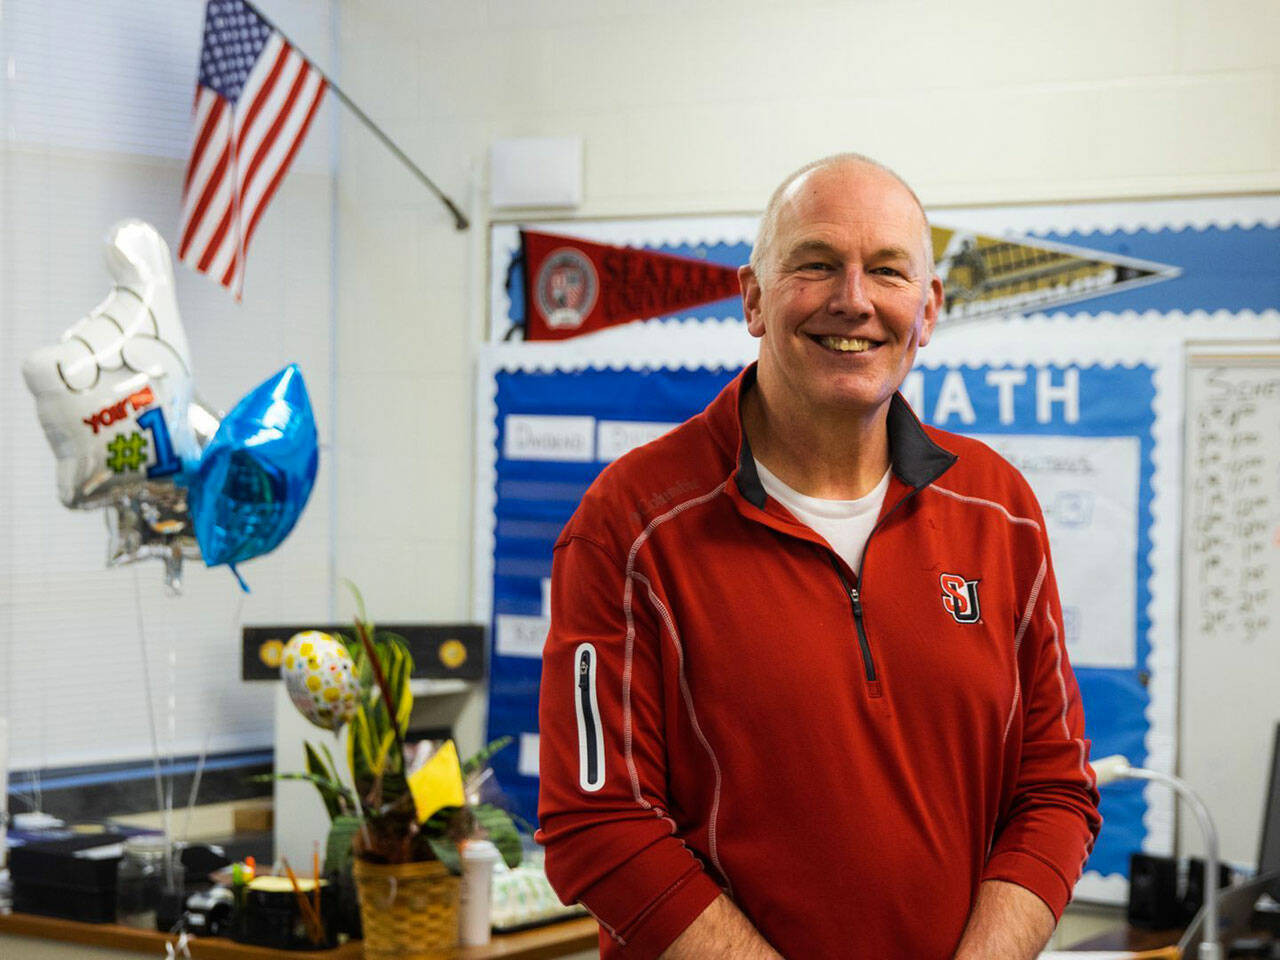 The Kent School District chose Michael Carney, a sixth-grade teacher at Scenic Hill Elementary School, as its Teacher of the Year for 2021-2022. COURTESY PHOTO, Kent School District